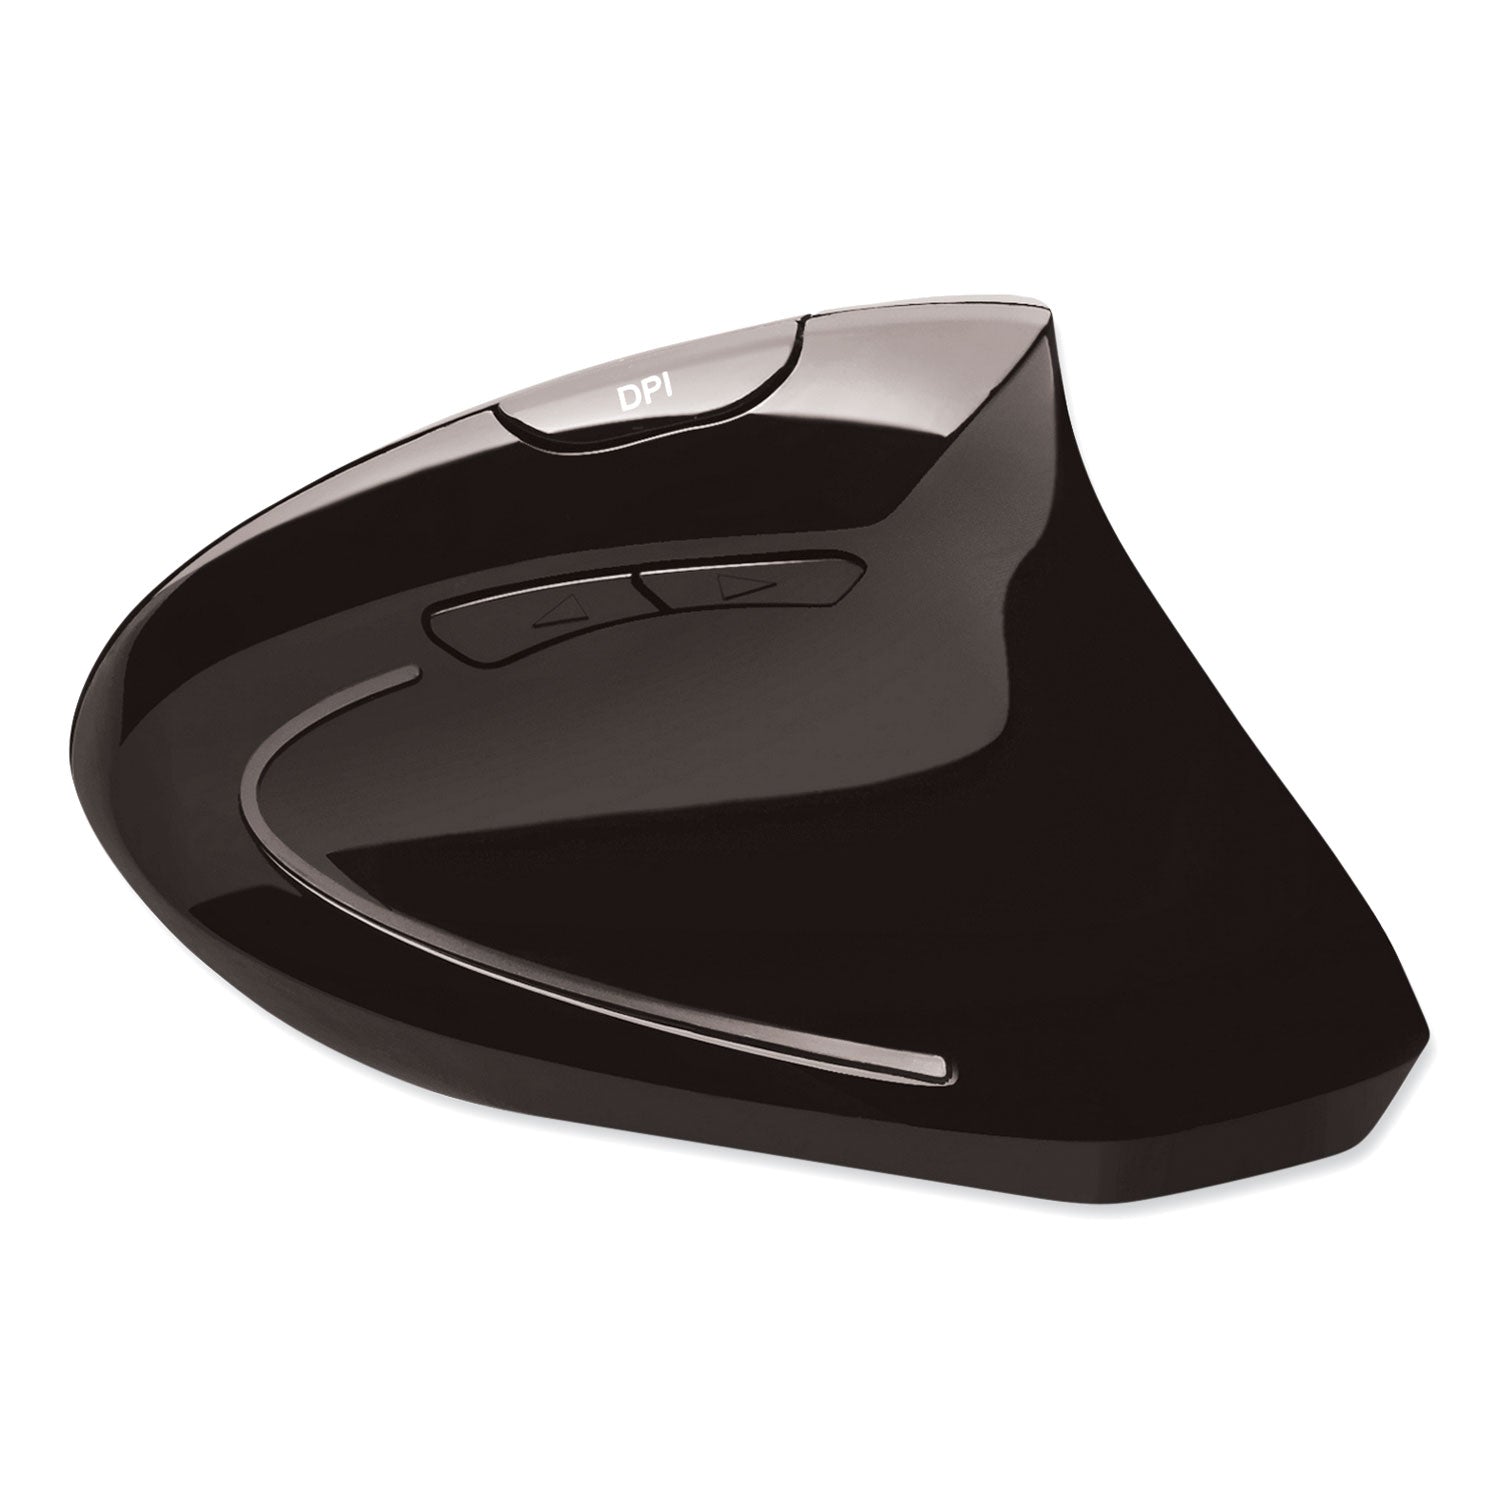 imouse-e10-wireless-vertical-ergonomic-usb-mouse-24-ghz-frequency-33-ft-wireless-range-right-hand-use-black_adeimousee10 - 5